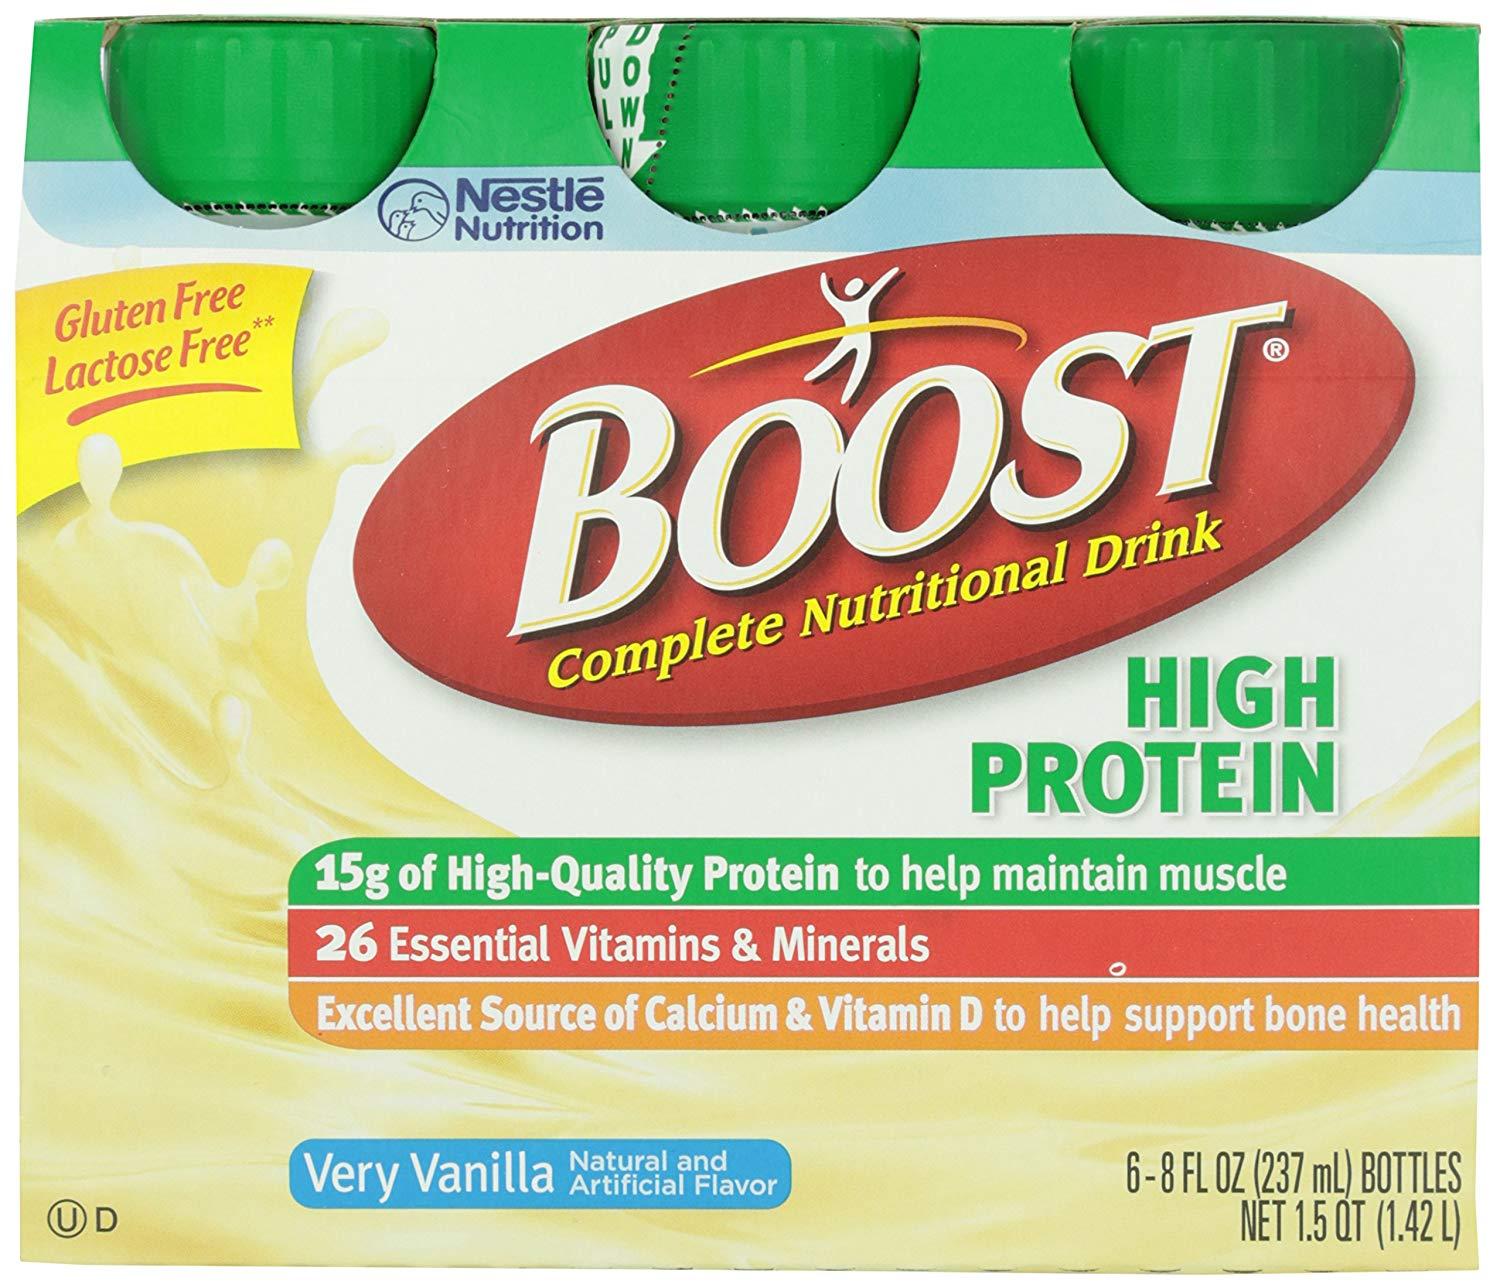 Boost Nutritional Drink Logo - Amazon.com : Boost High Protein Complete Nutritional Drink Vanilla ...